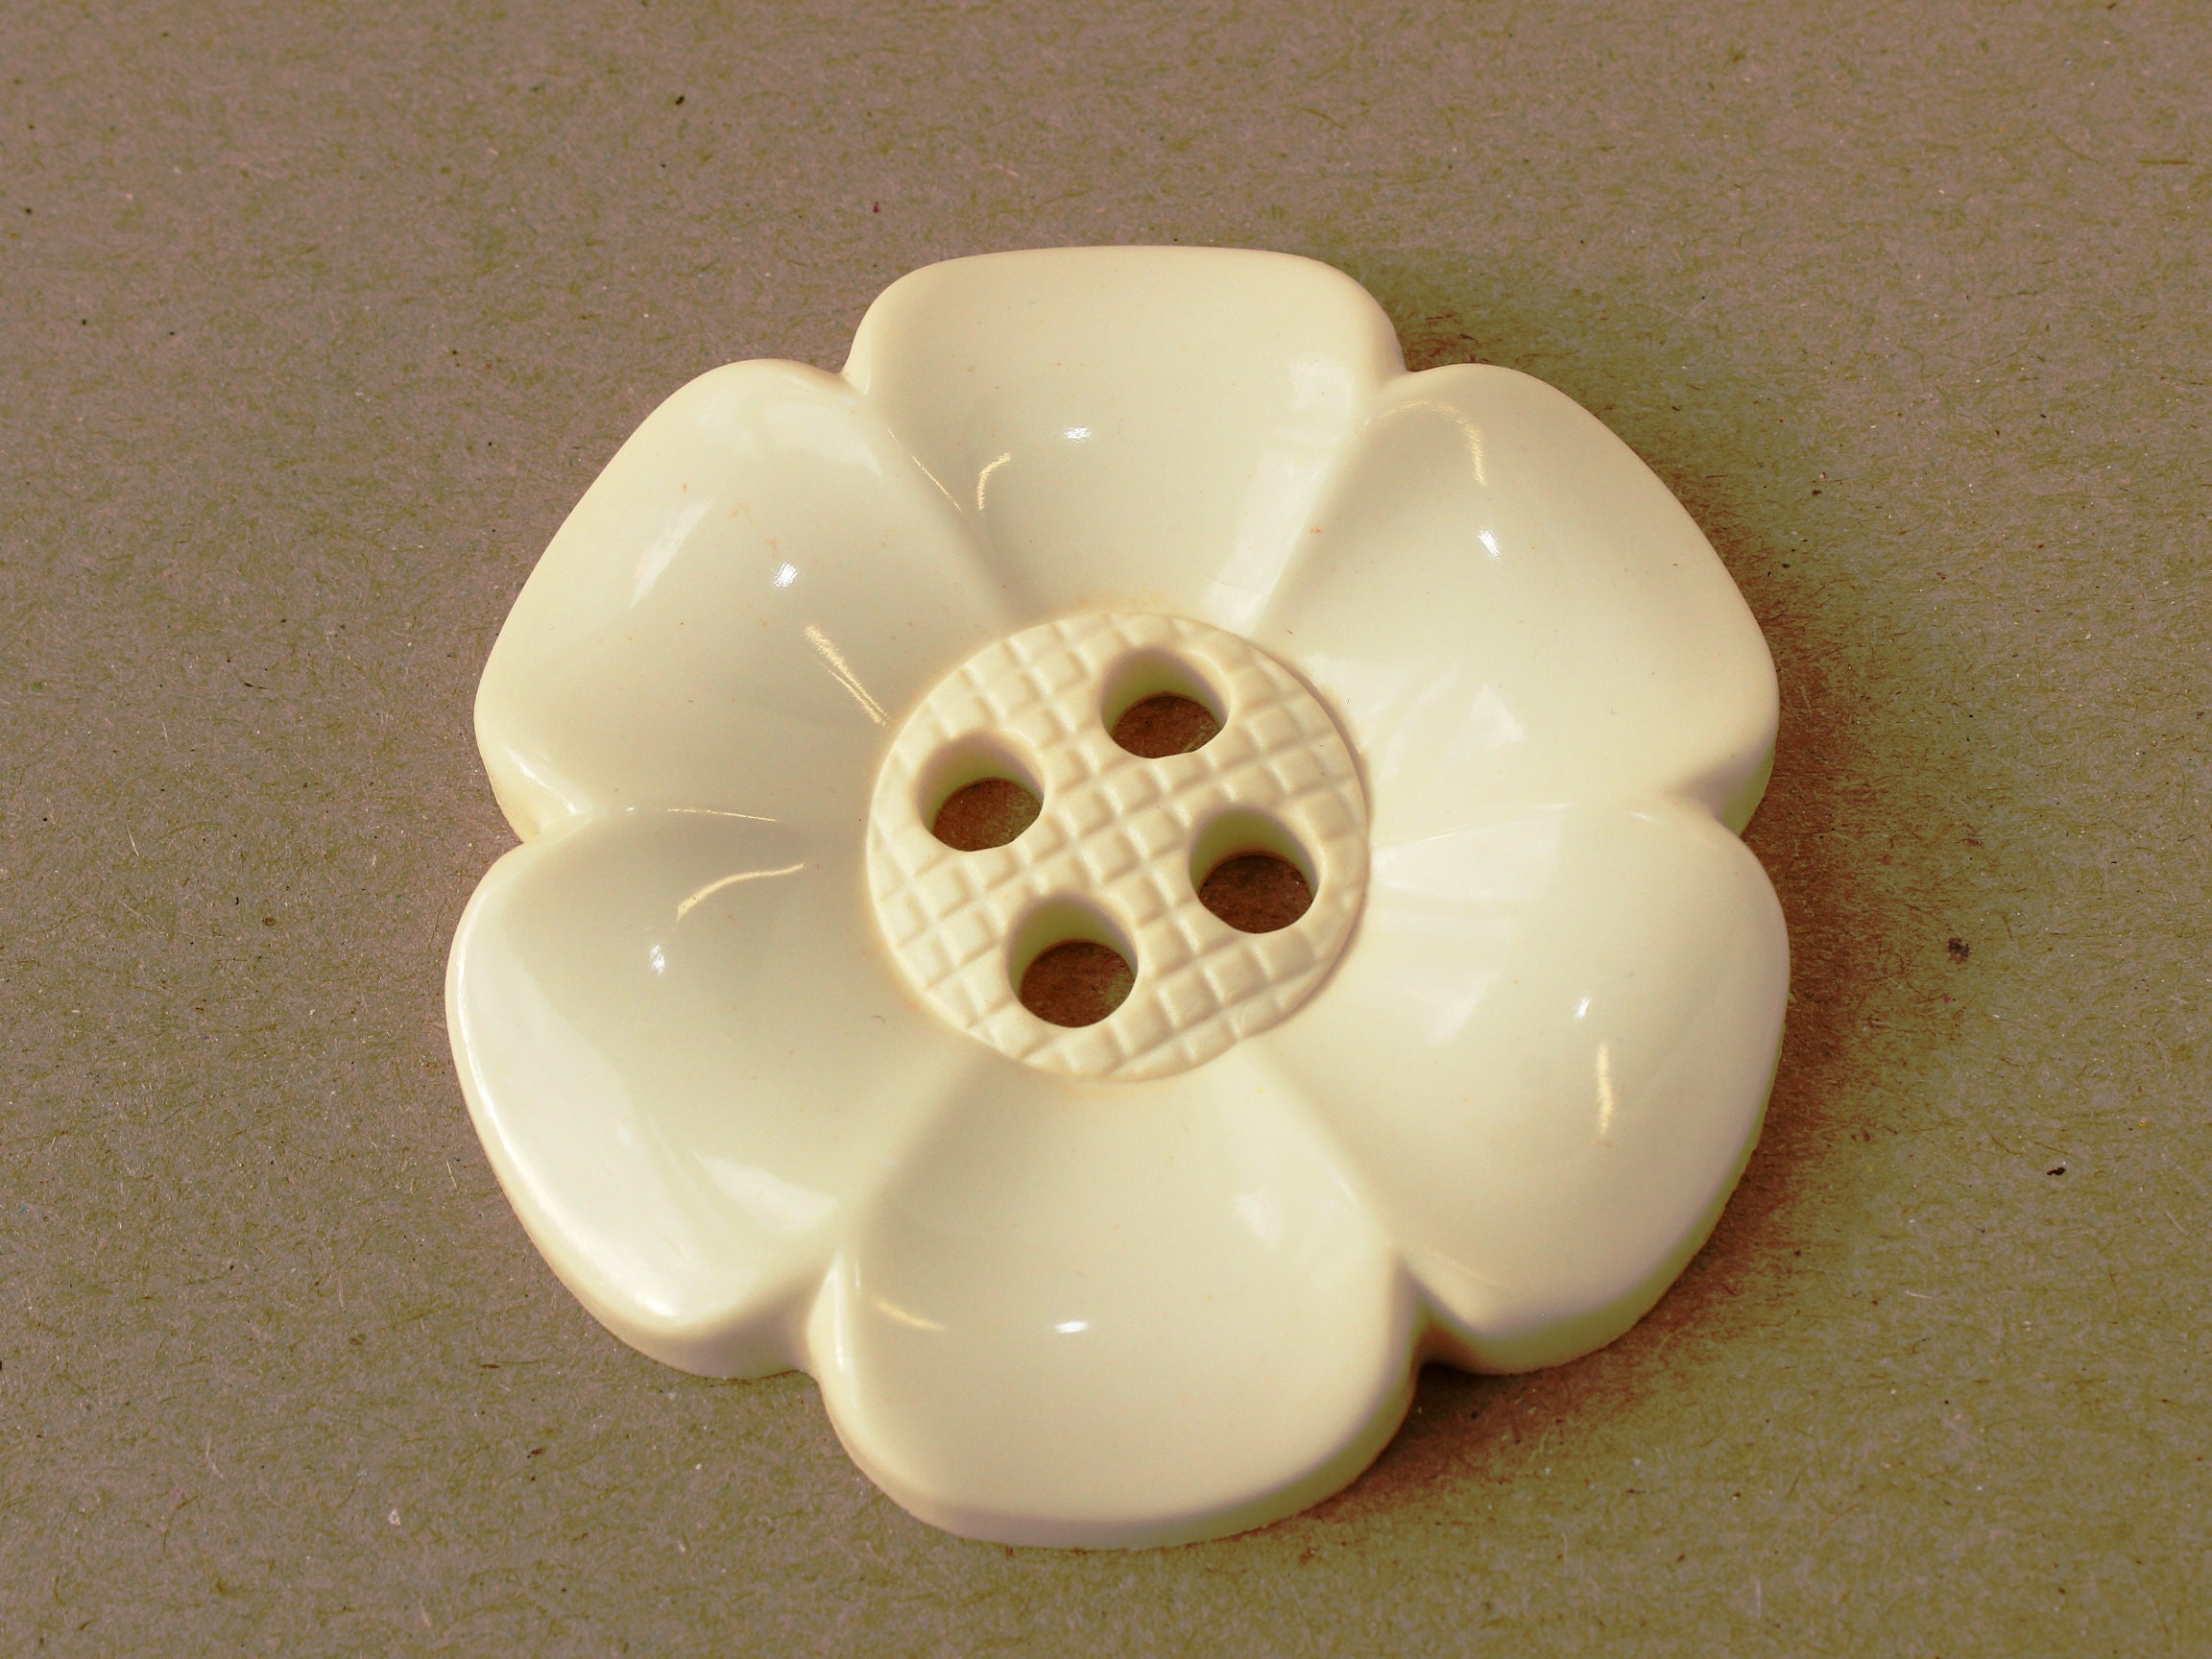 Giant Flower Buttons, Giant CREAM Flower Buttons 6.5cm, Extra Large Buttons,  Huge Novelty Button, Giant Children's Buttons, UK Buttons Shop 